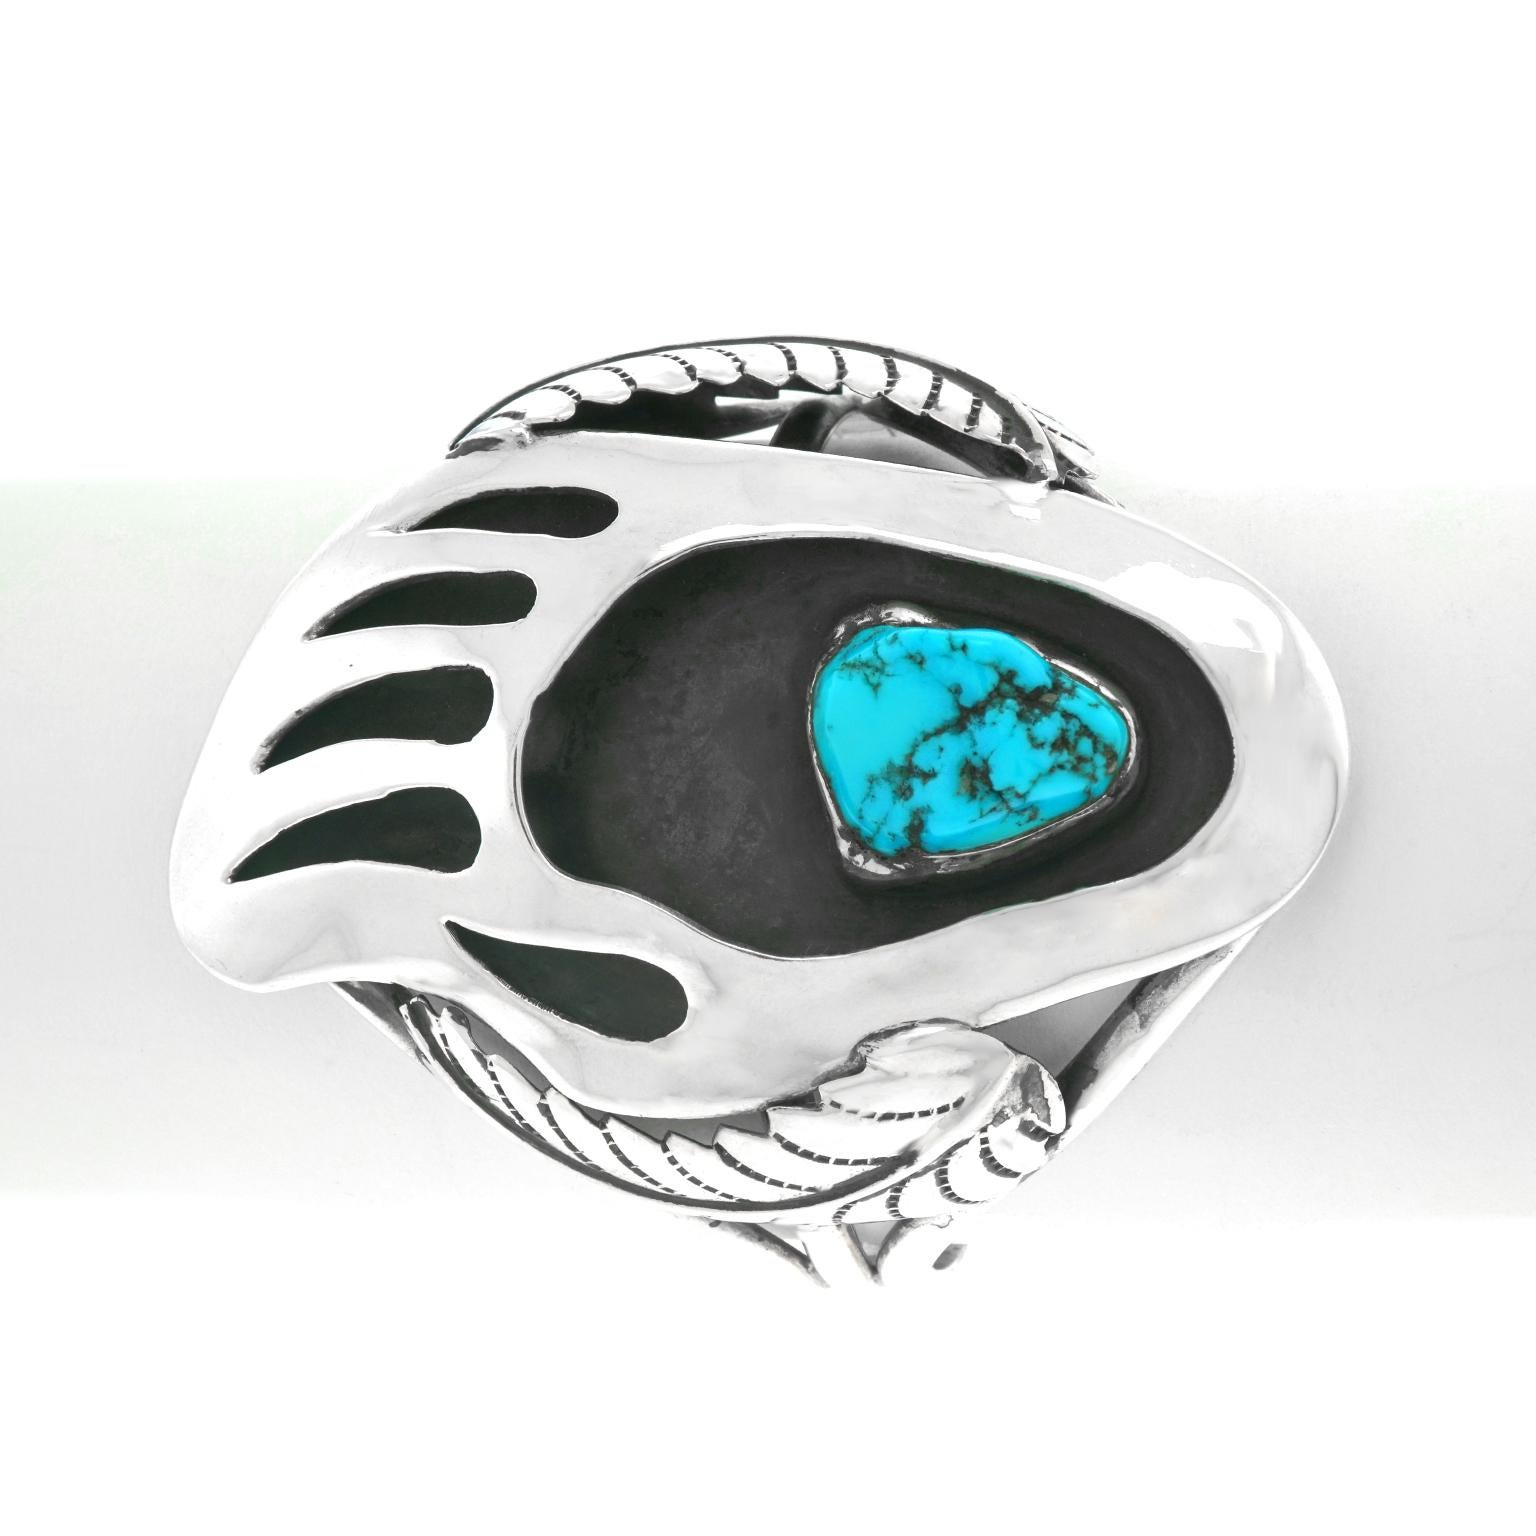 Navajo Bear Claw Sterling Cuff Bracelet with Turquoise 1